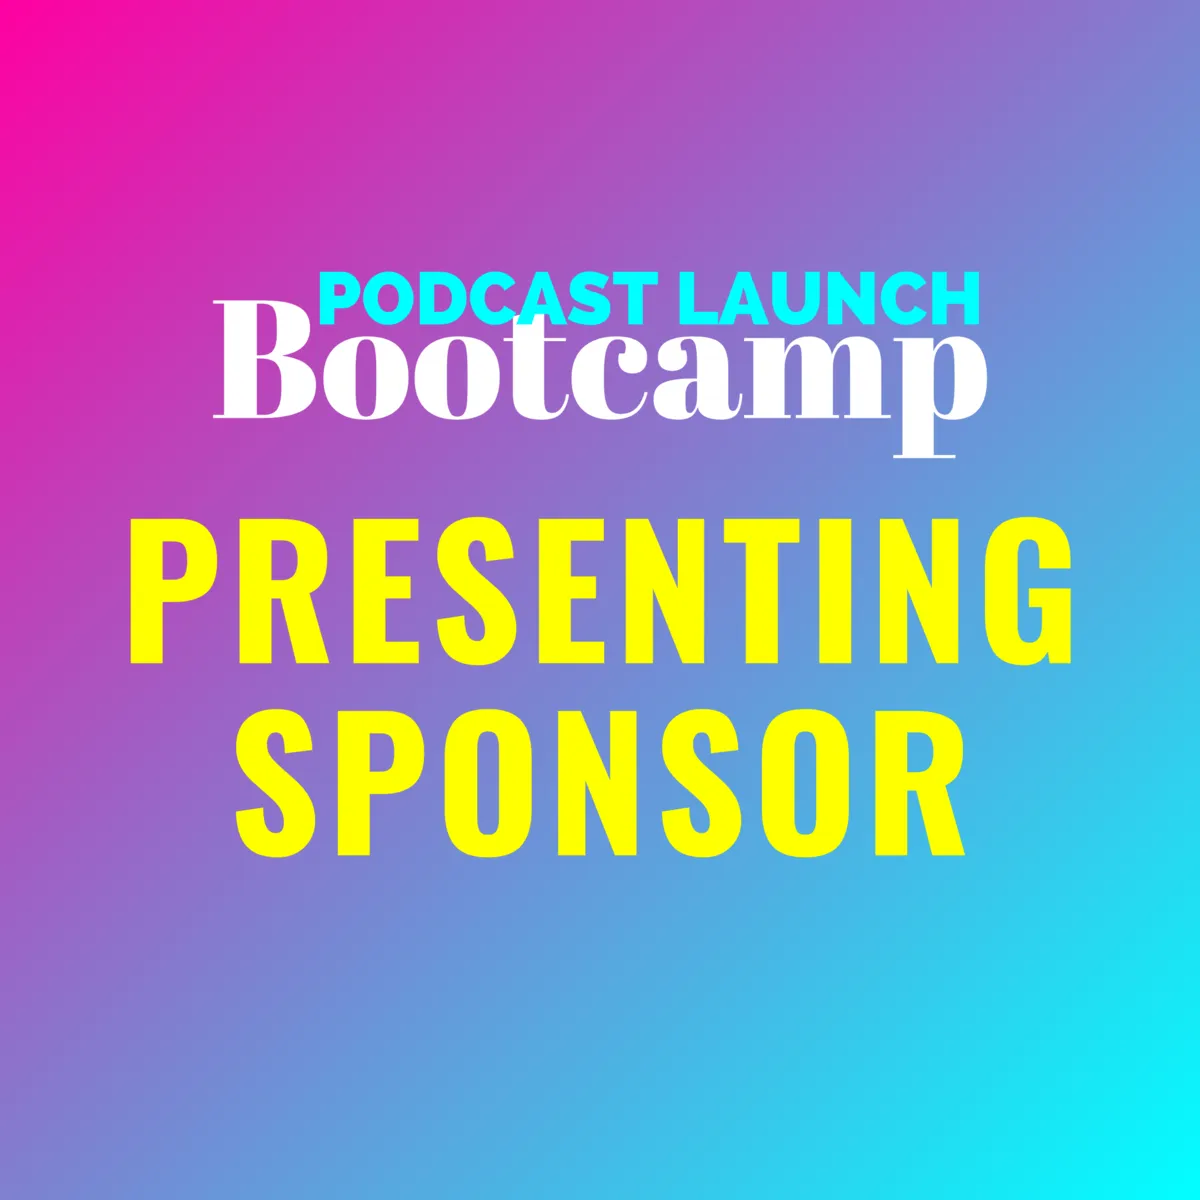 Presenting Sponsor: Podcast Launch Bootcamp